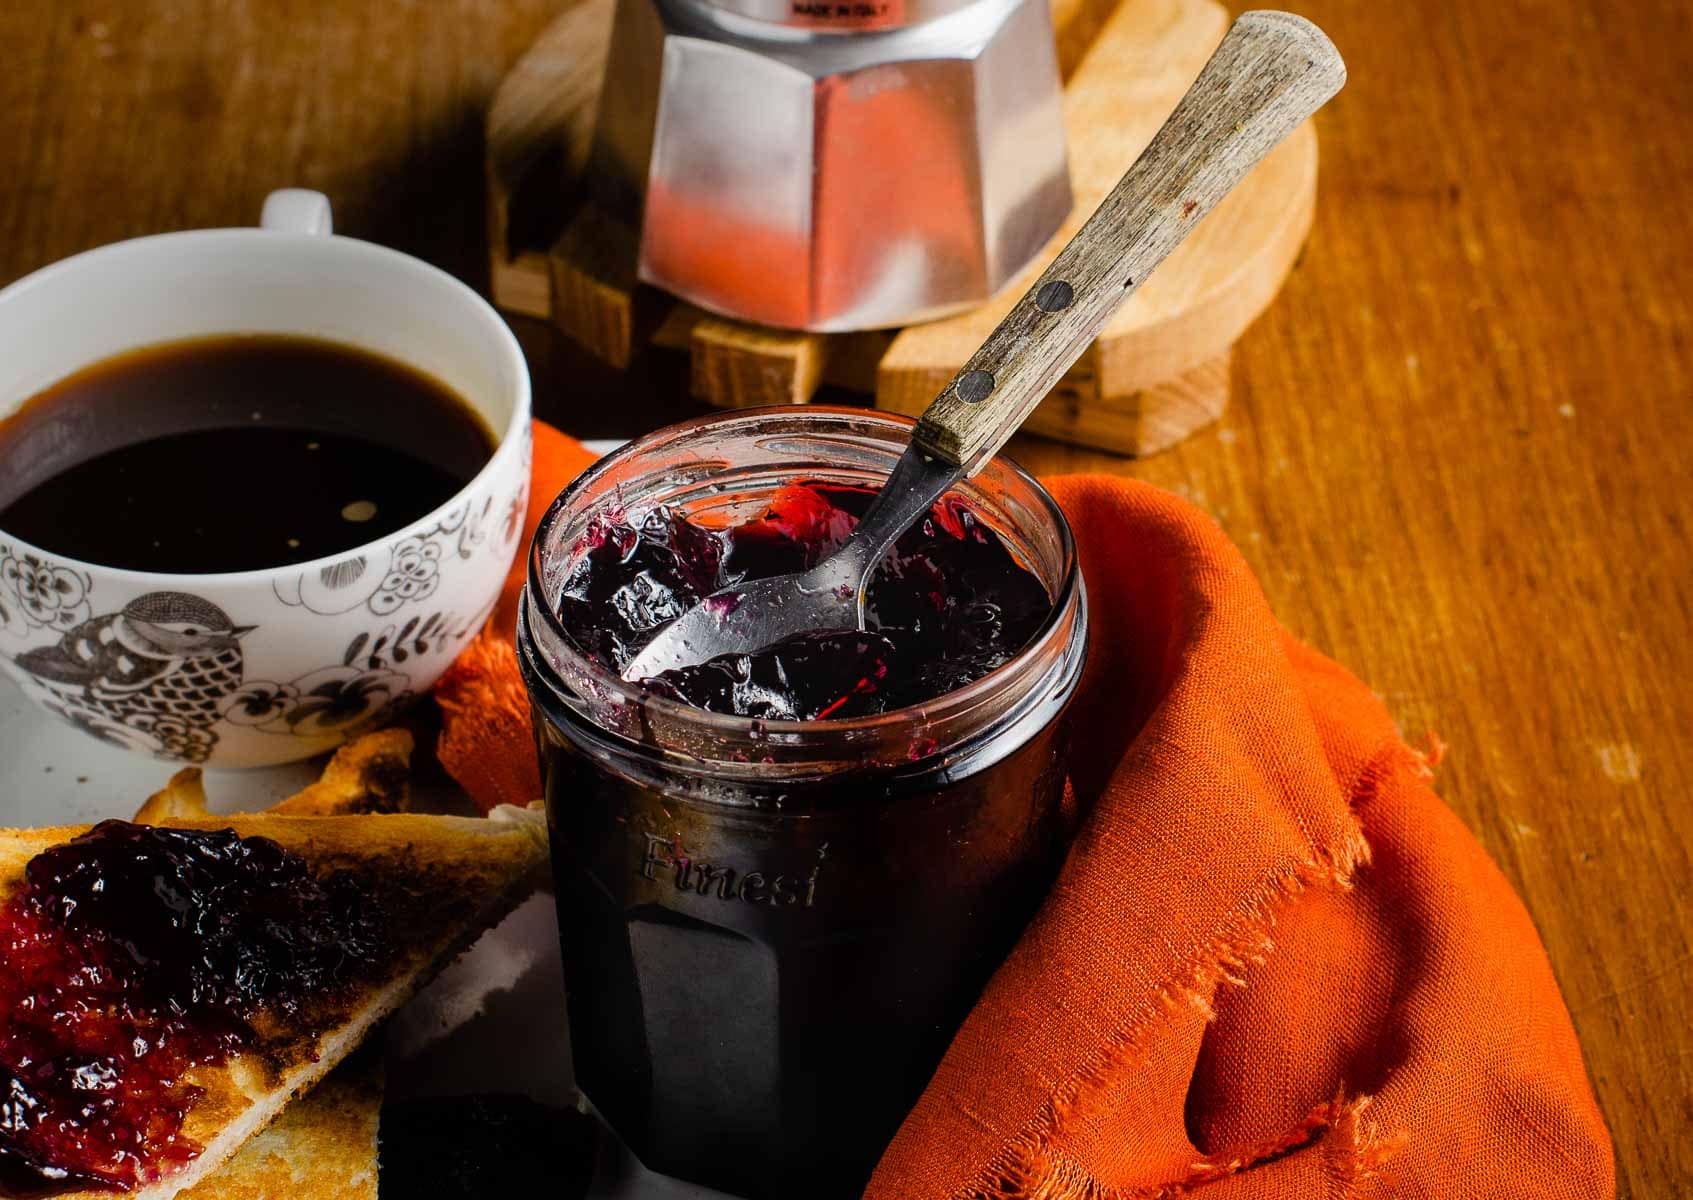 A breakfast tray of fresh homemade jelly, slices of toast and a freshly brewed coffee.